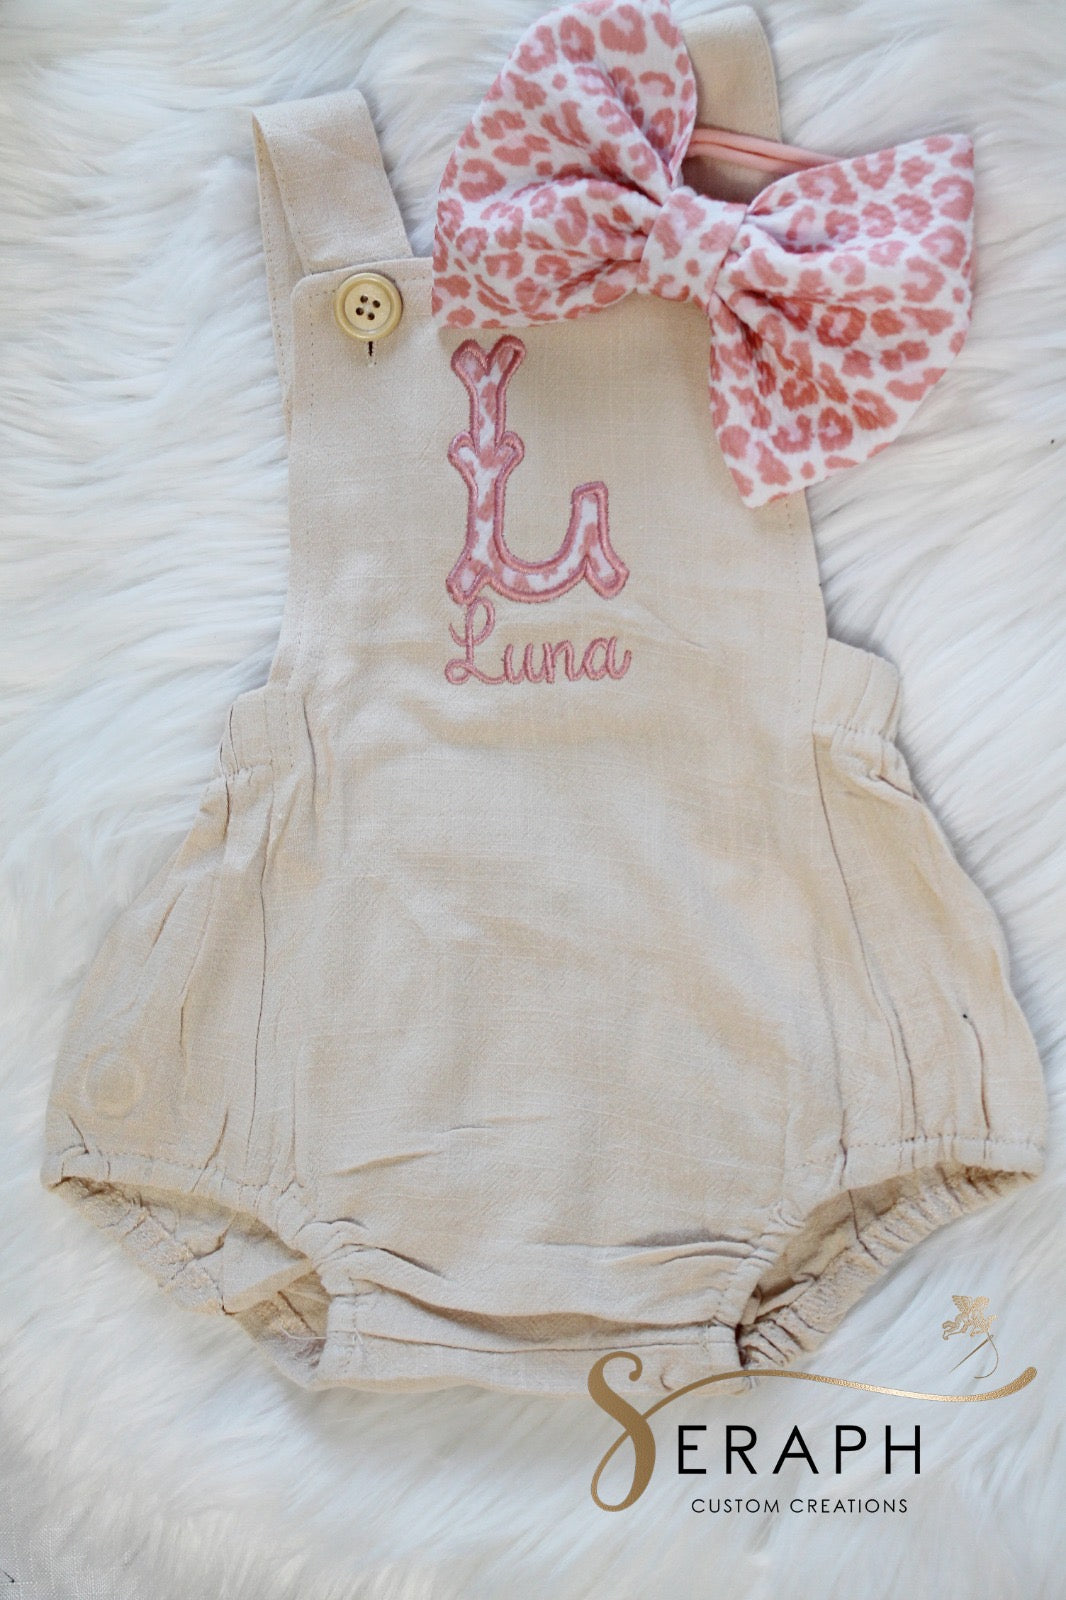 Girls Oatmeal Romper with Pink Cheetah Appliqué w/ Bow